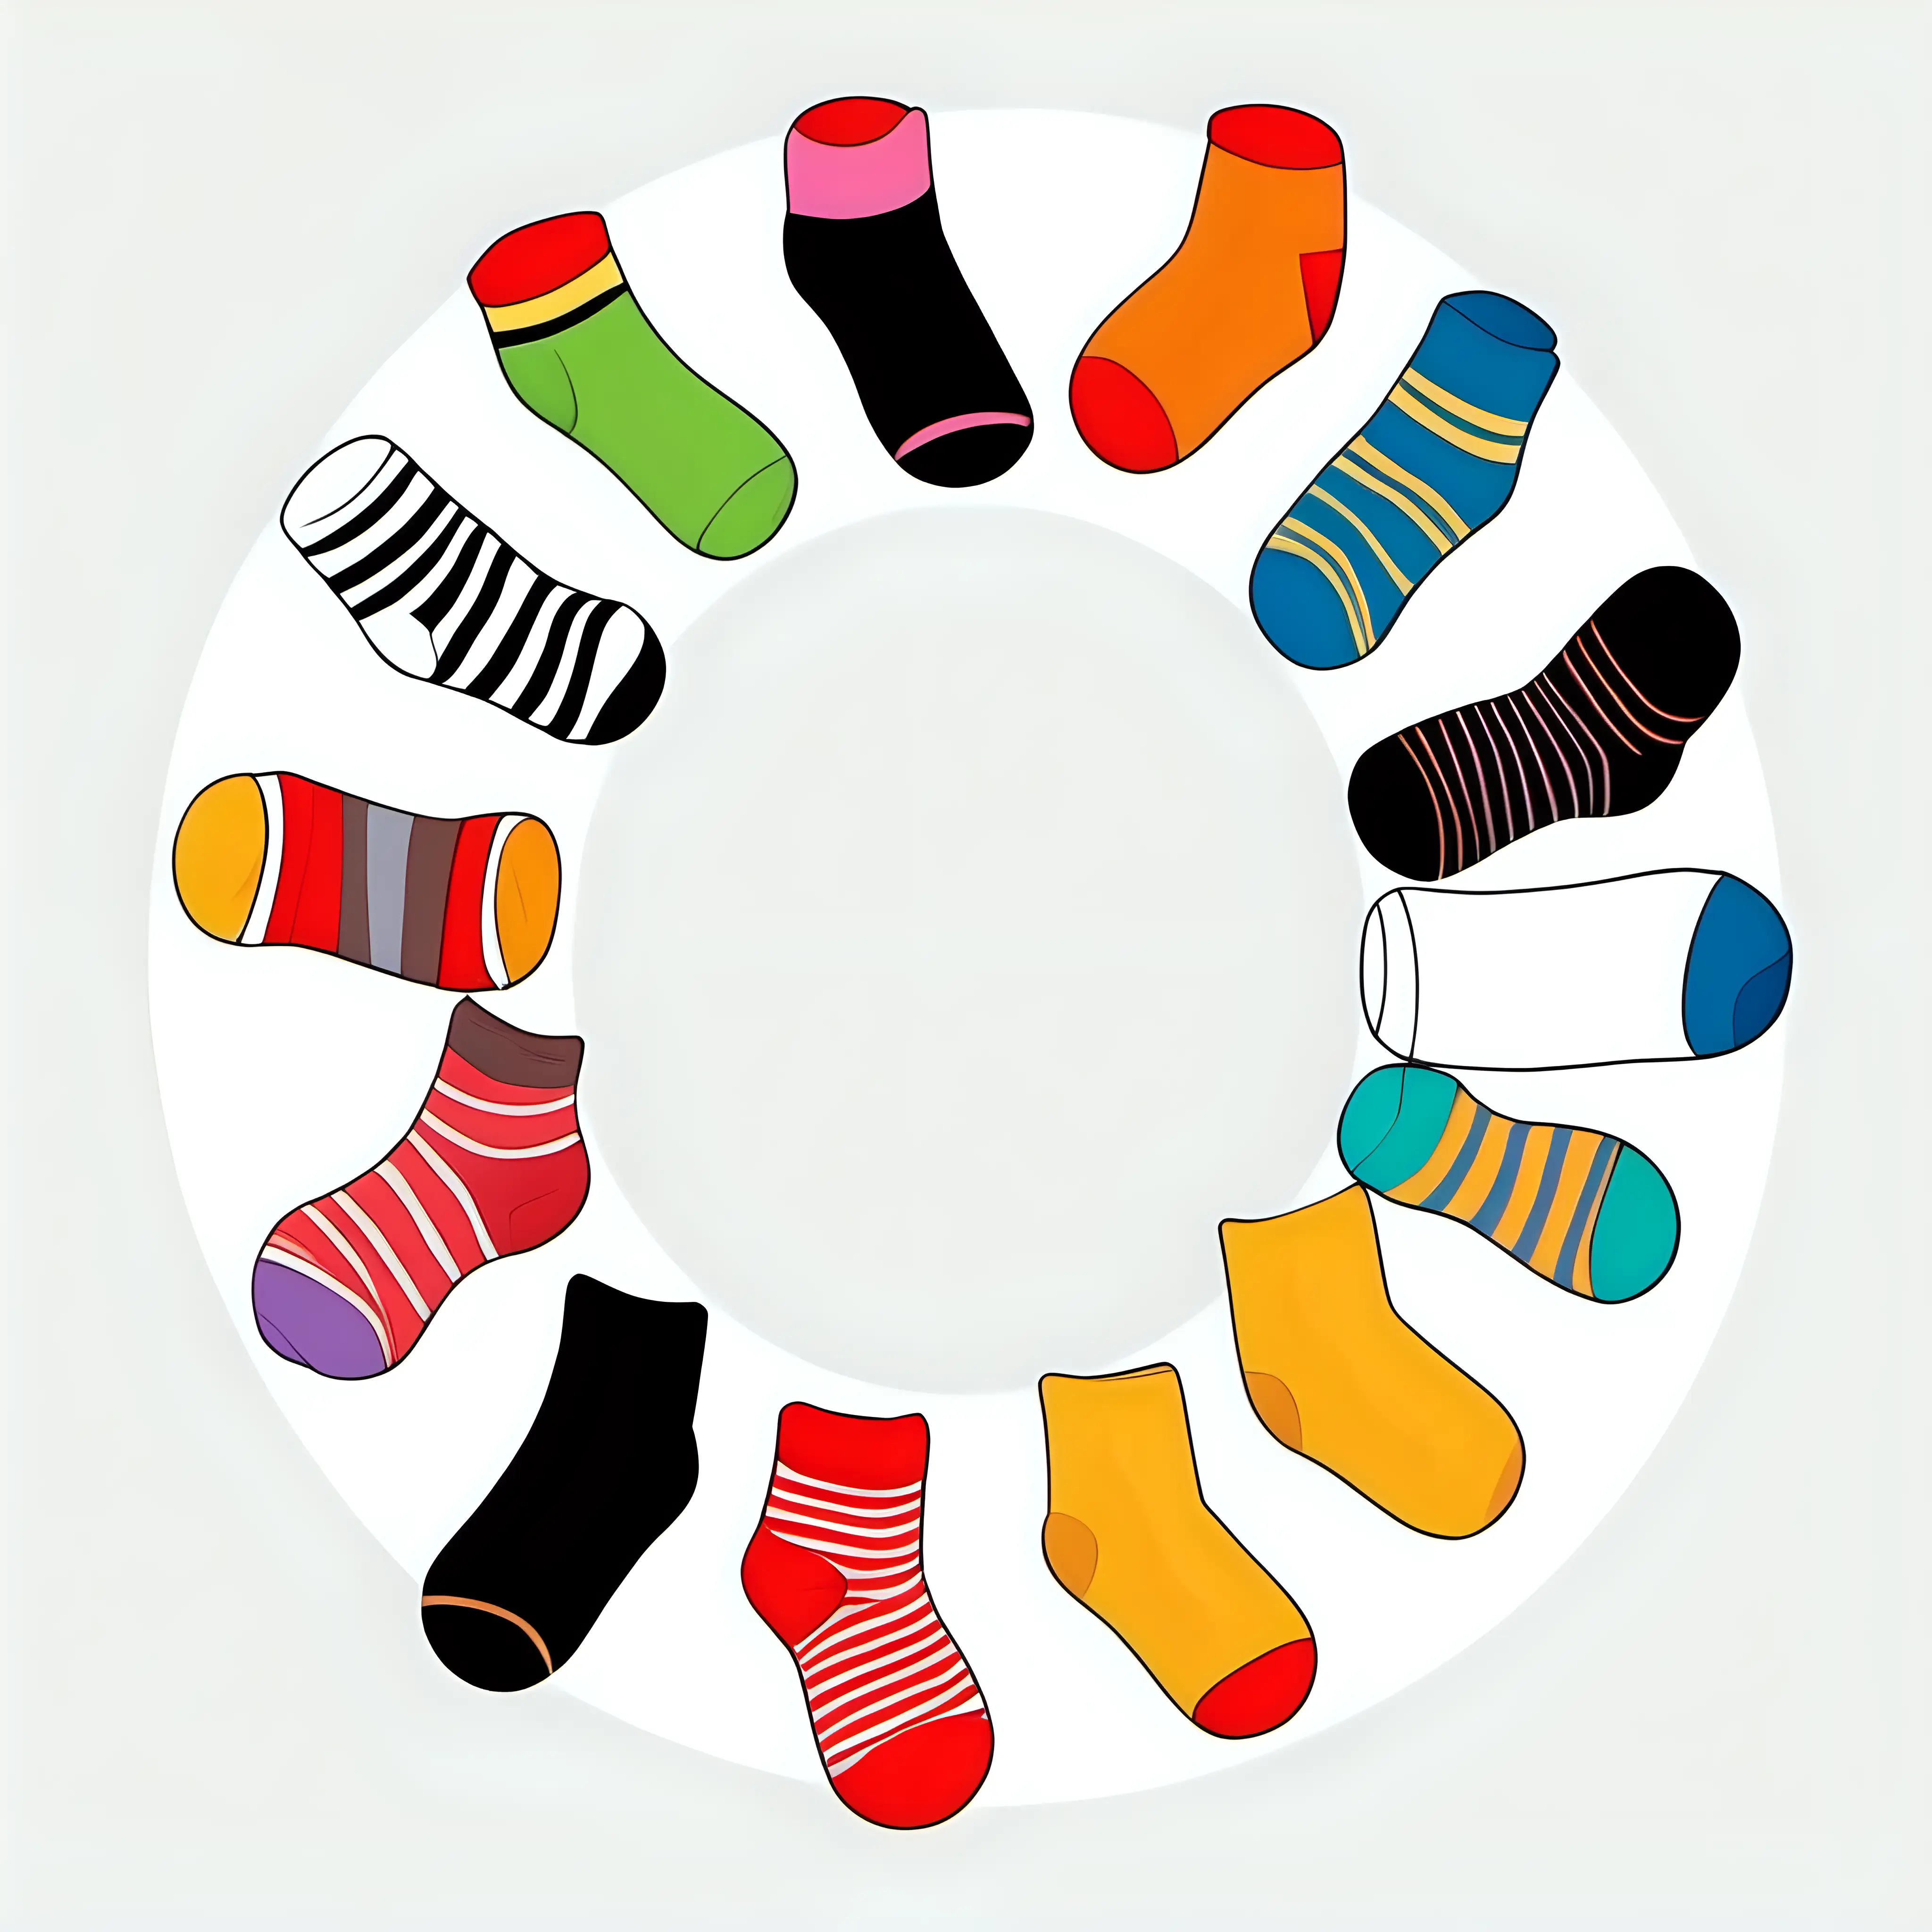 Colorful Cartoon Socks Forming Circle on White Background